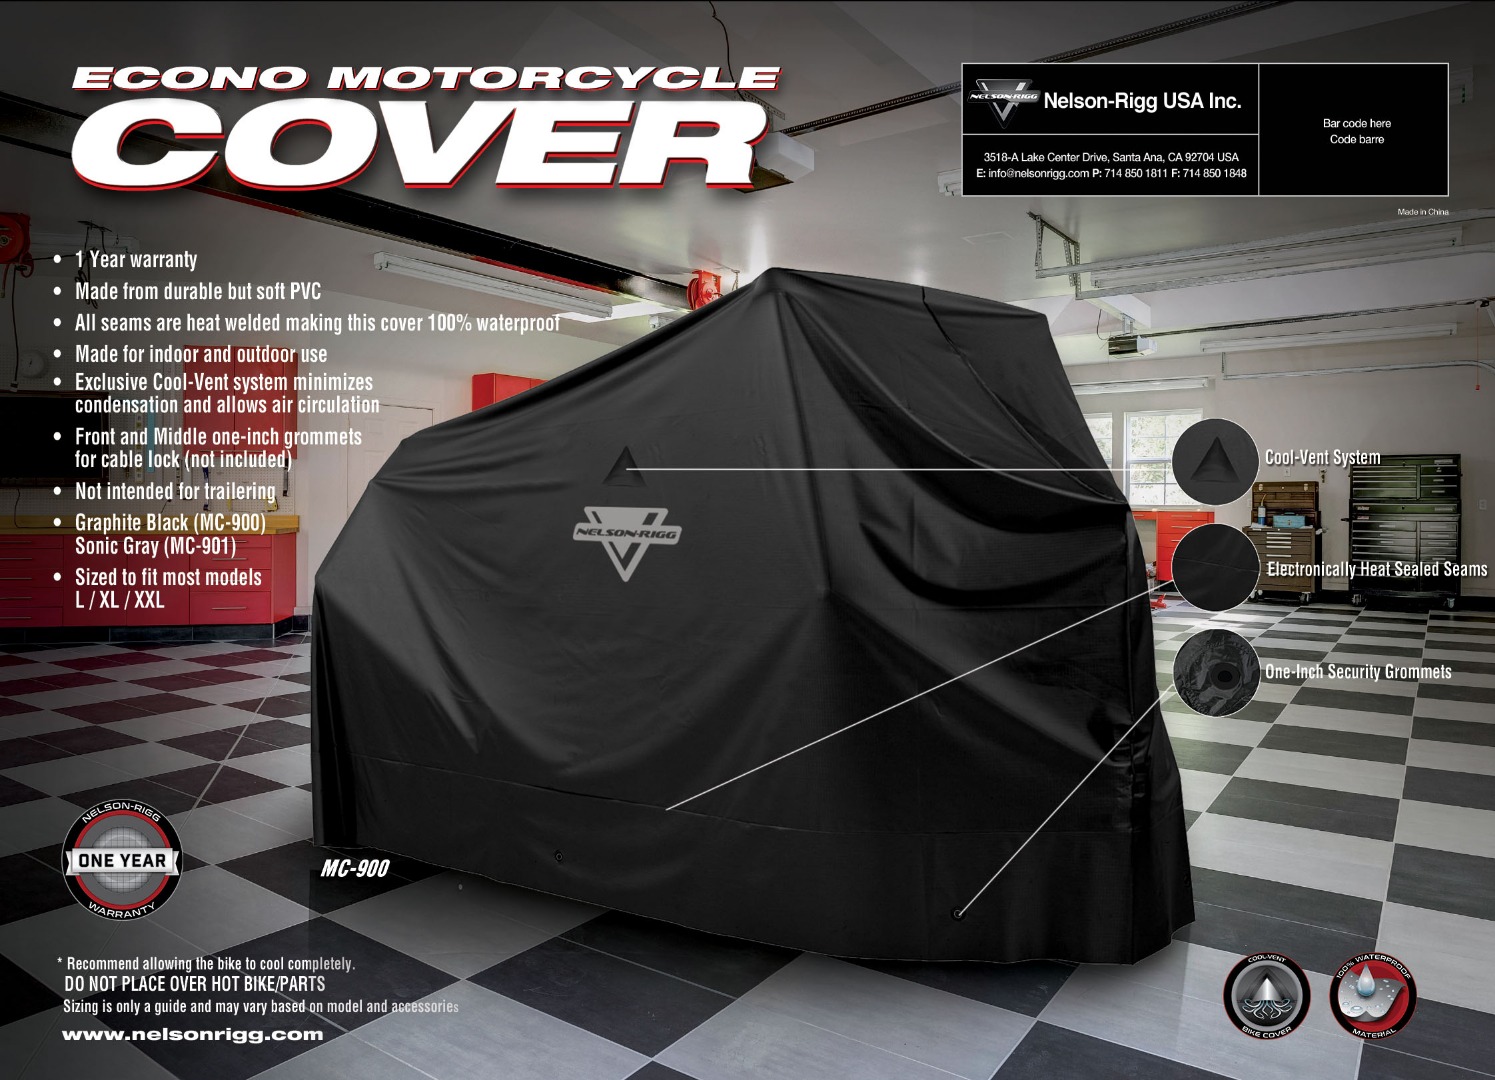 Nelson-Rigg Econo Motorcycle Cover Black, Large 